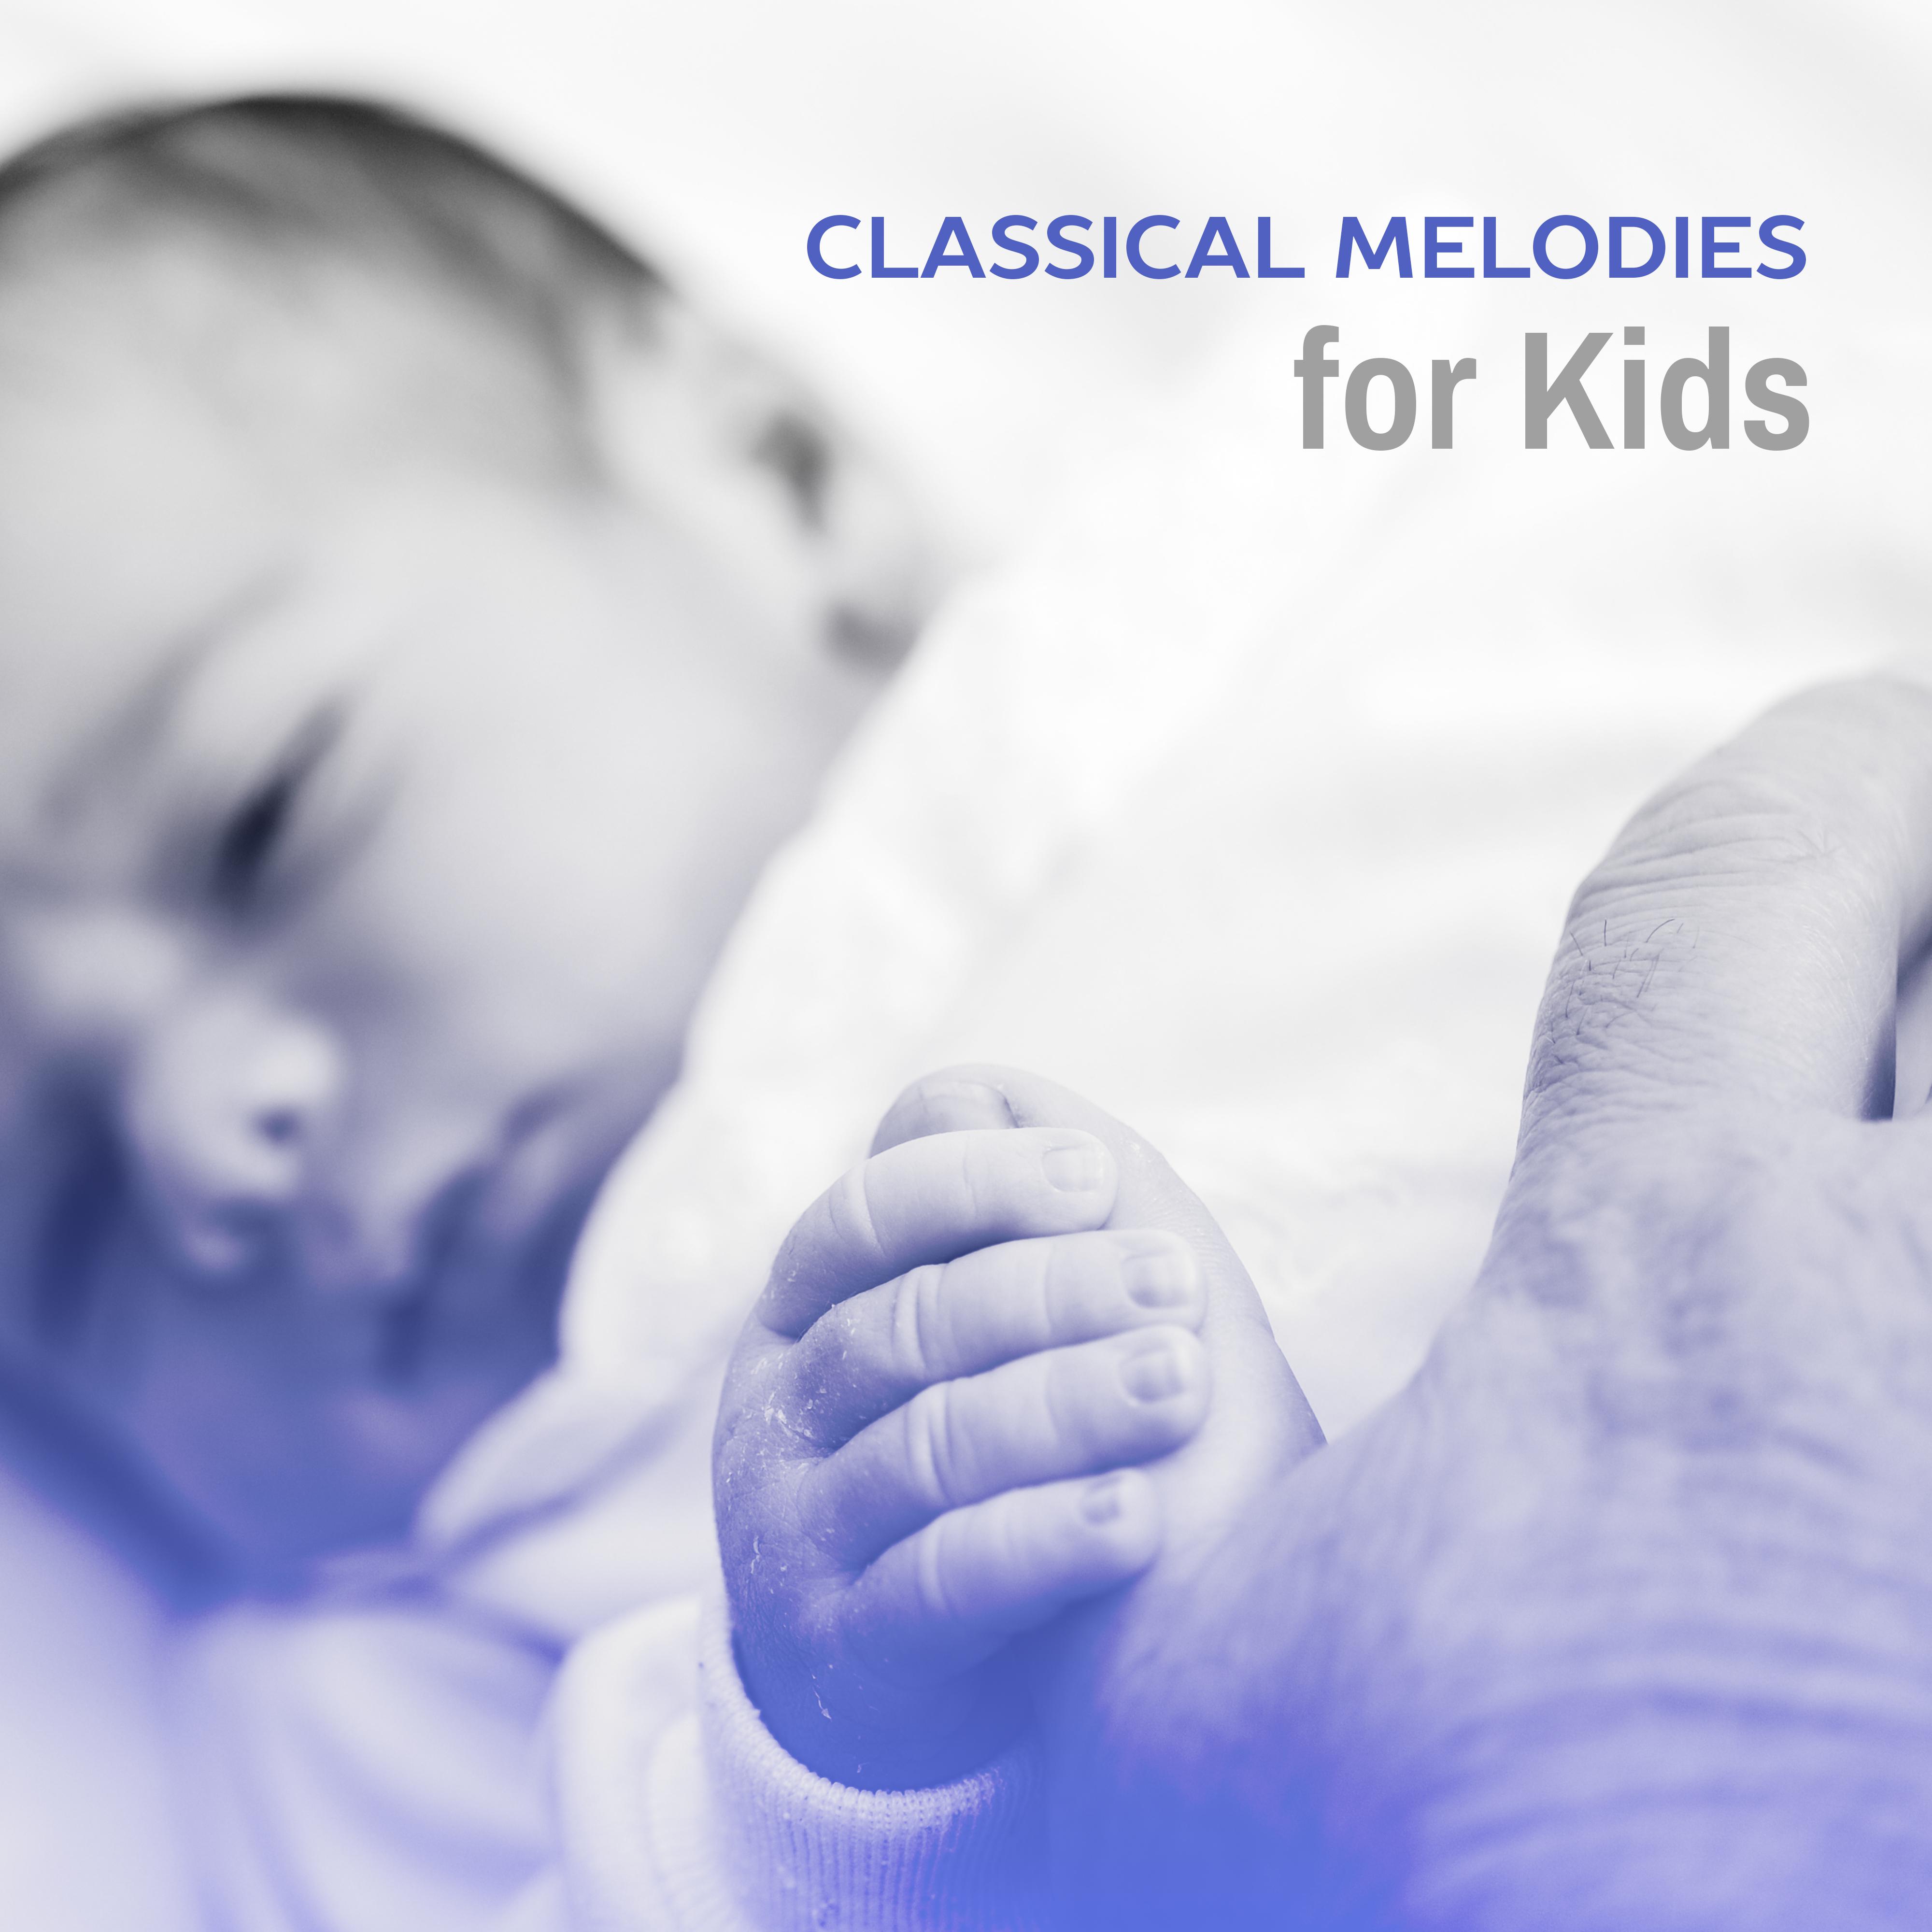 Classical Melodies for Kids  Soft Piano Sounds for Kids, Easy Listening, Classics to Calm Down Baby